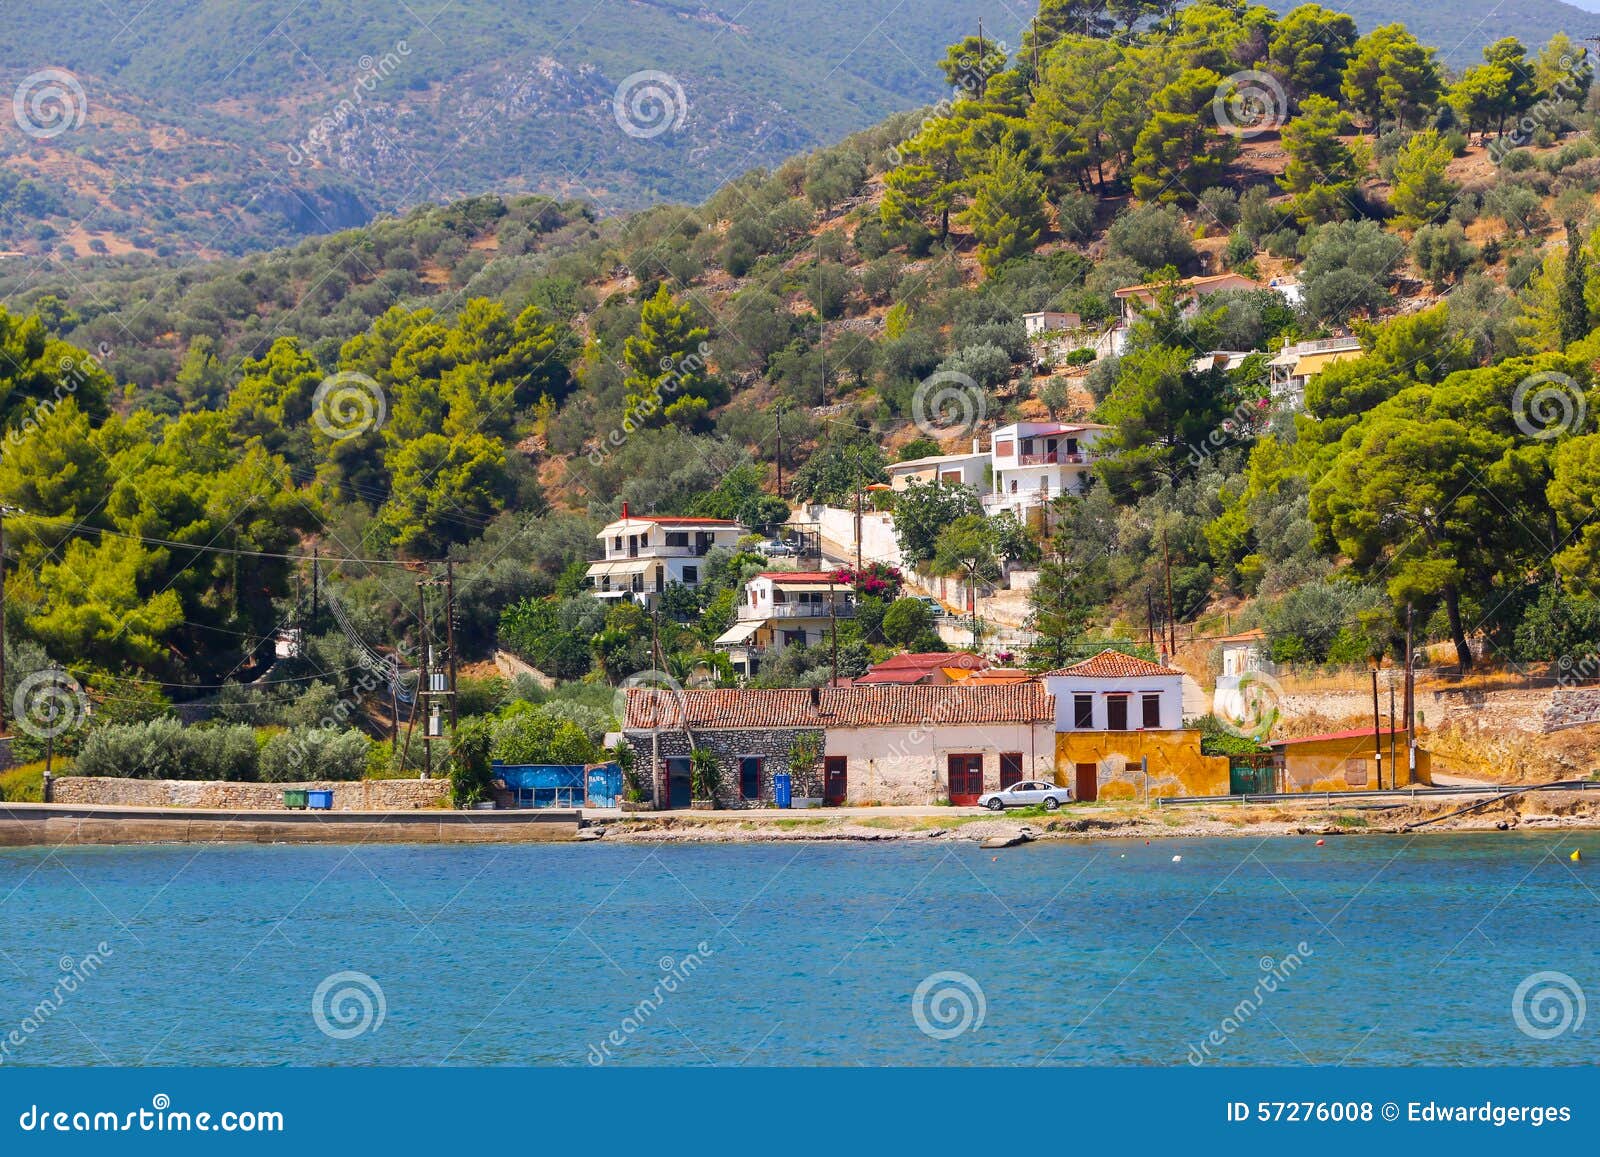 Houses and Yachts of Greece Island Editorial Stock Photo - Image of ...